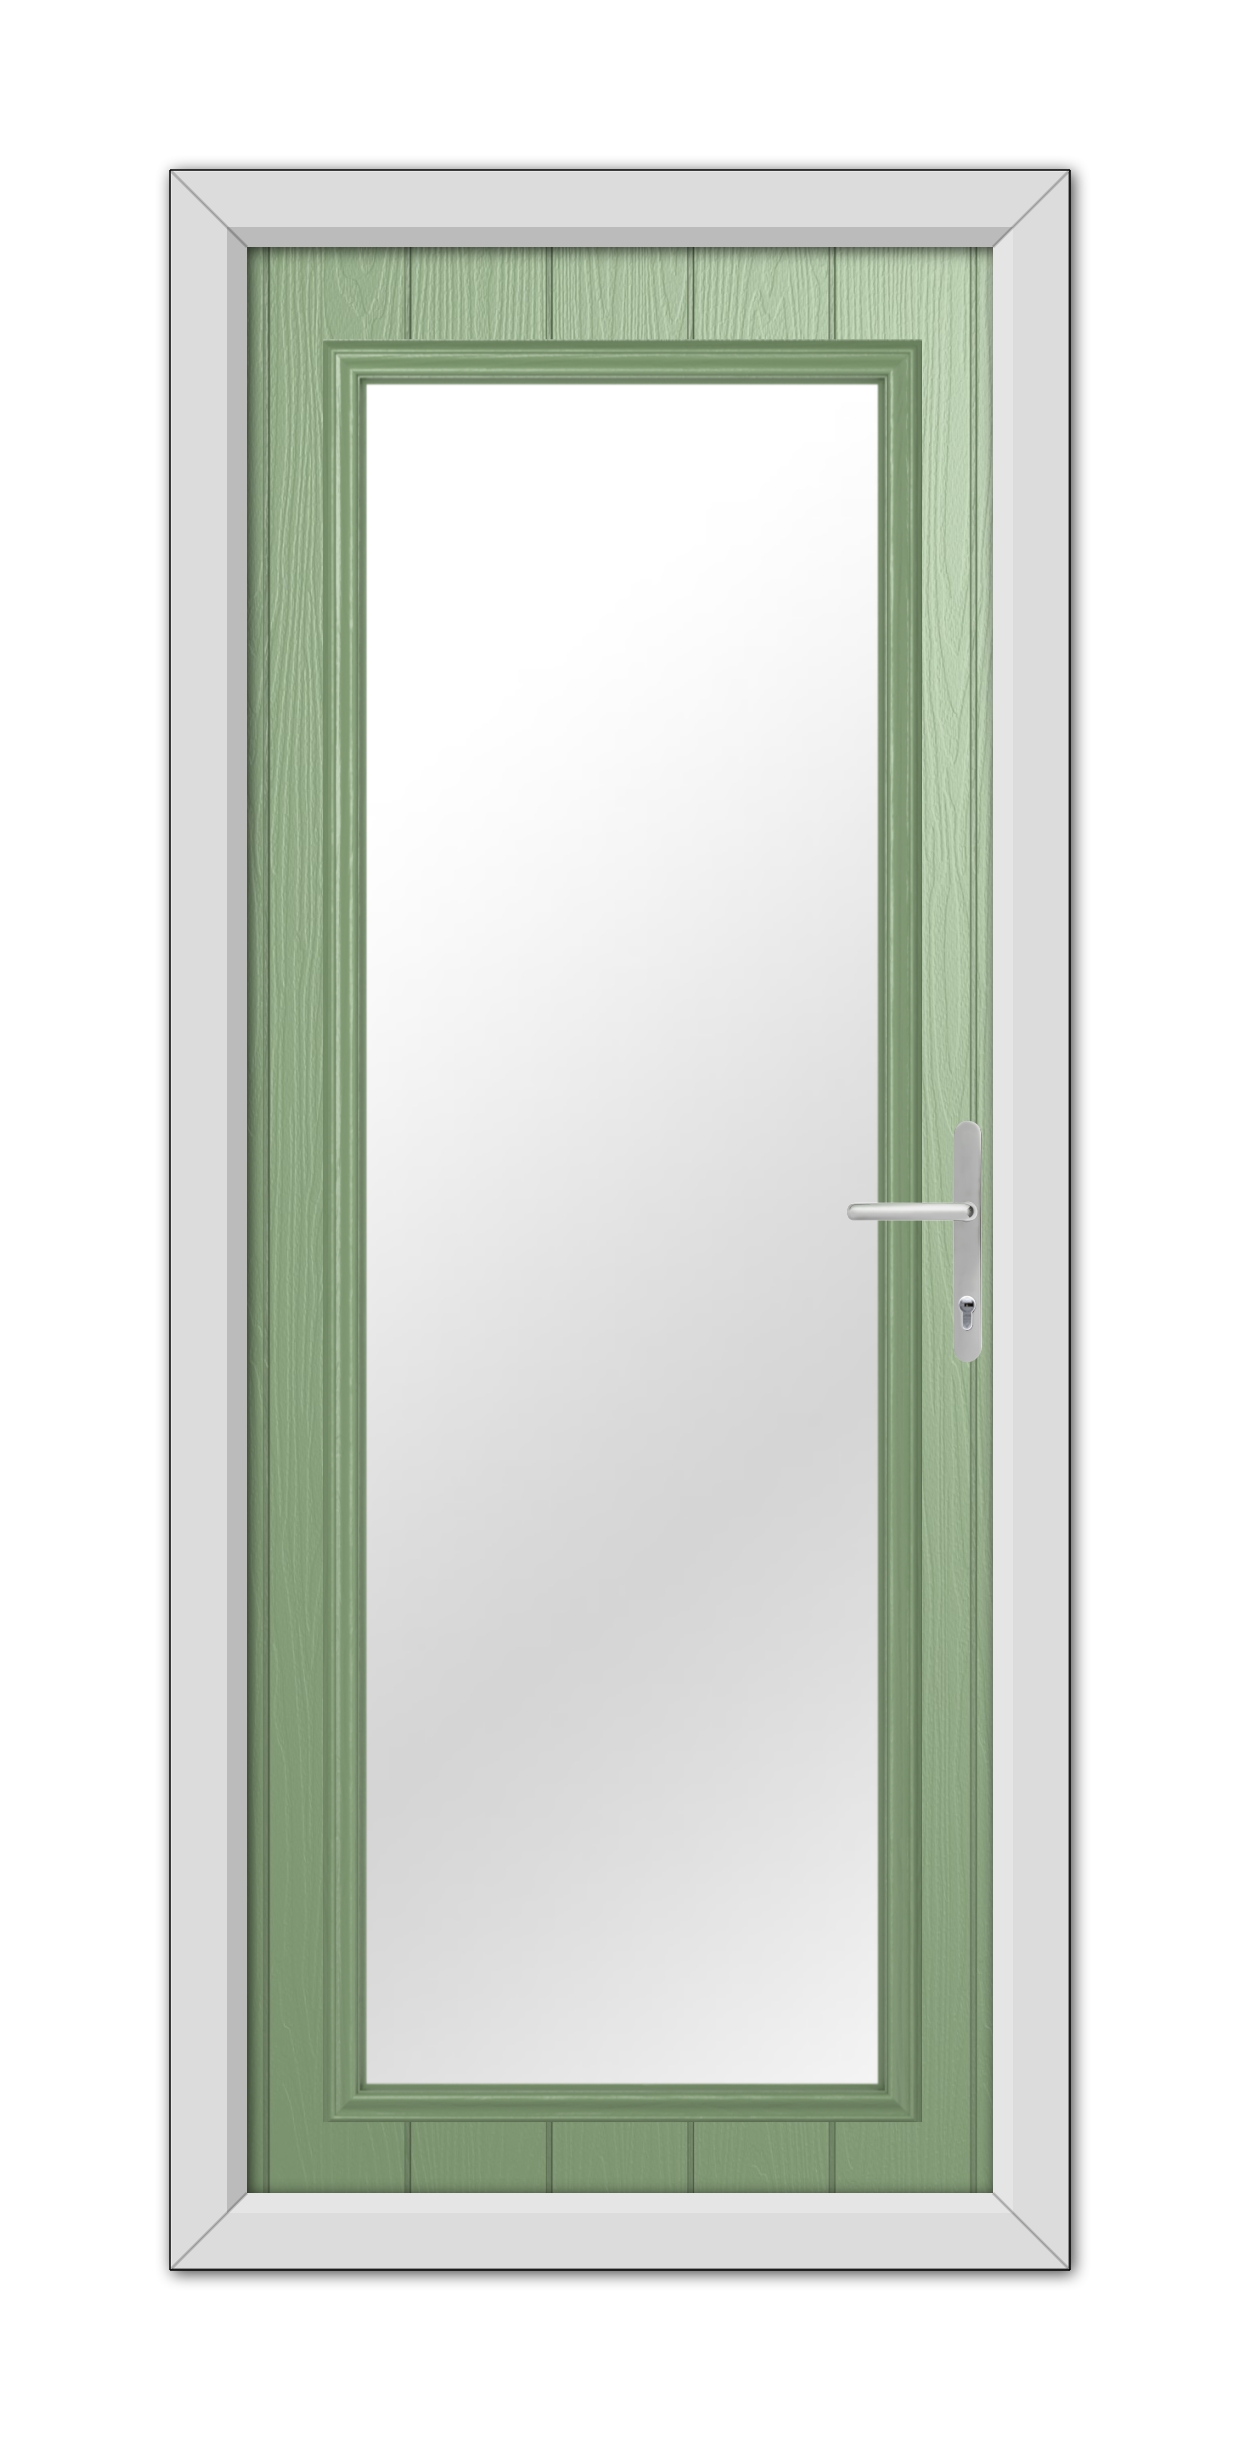 A modern Chartwell Green Hatton Composite Door 48mm Timber Core with a prominent white frame and a silver handle, featuring a large rectangular glass panel.